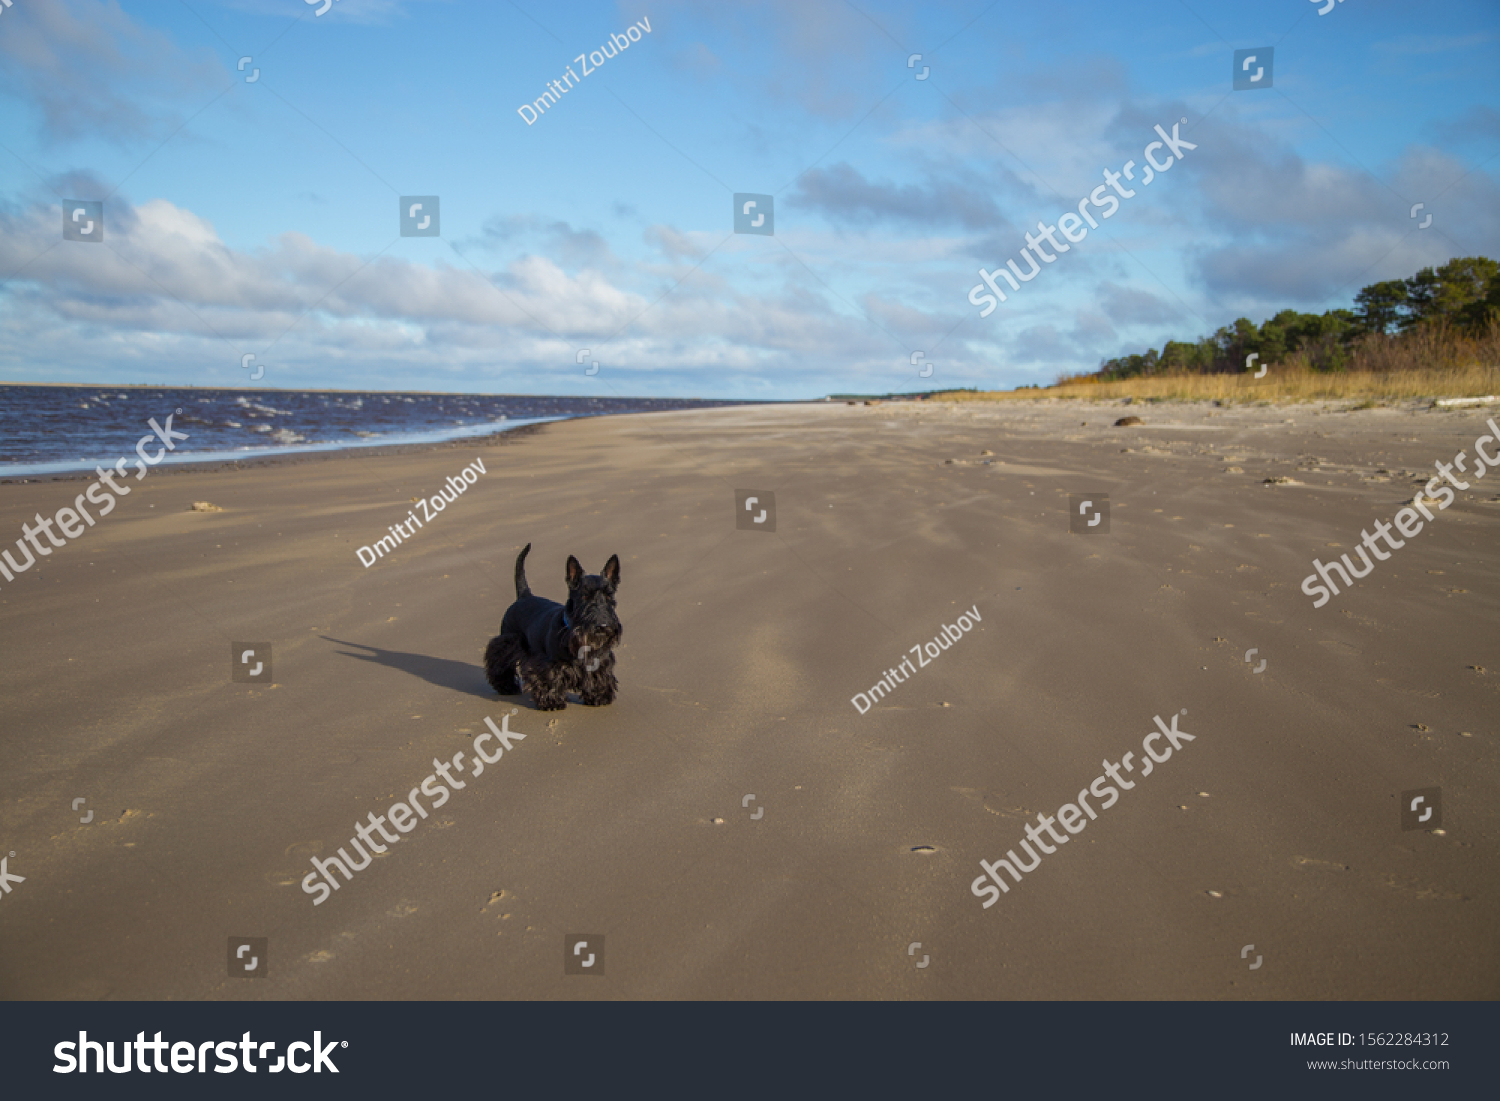 Scottish terrier black dog  standing by the sea on the sandy beach on a windy day #1562284312